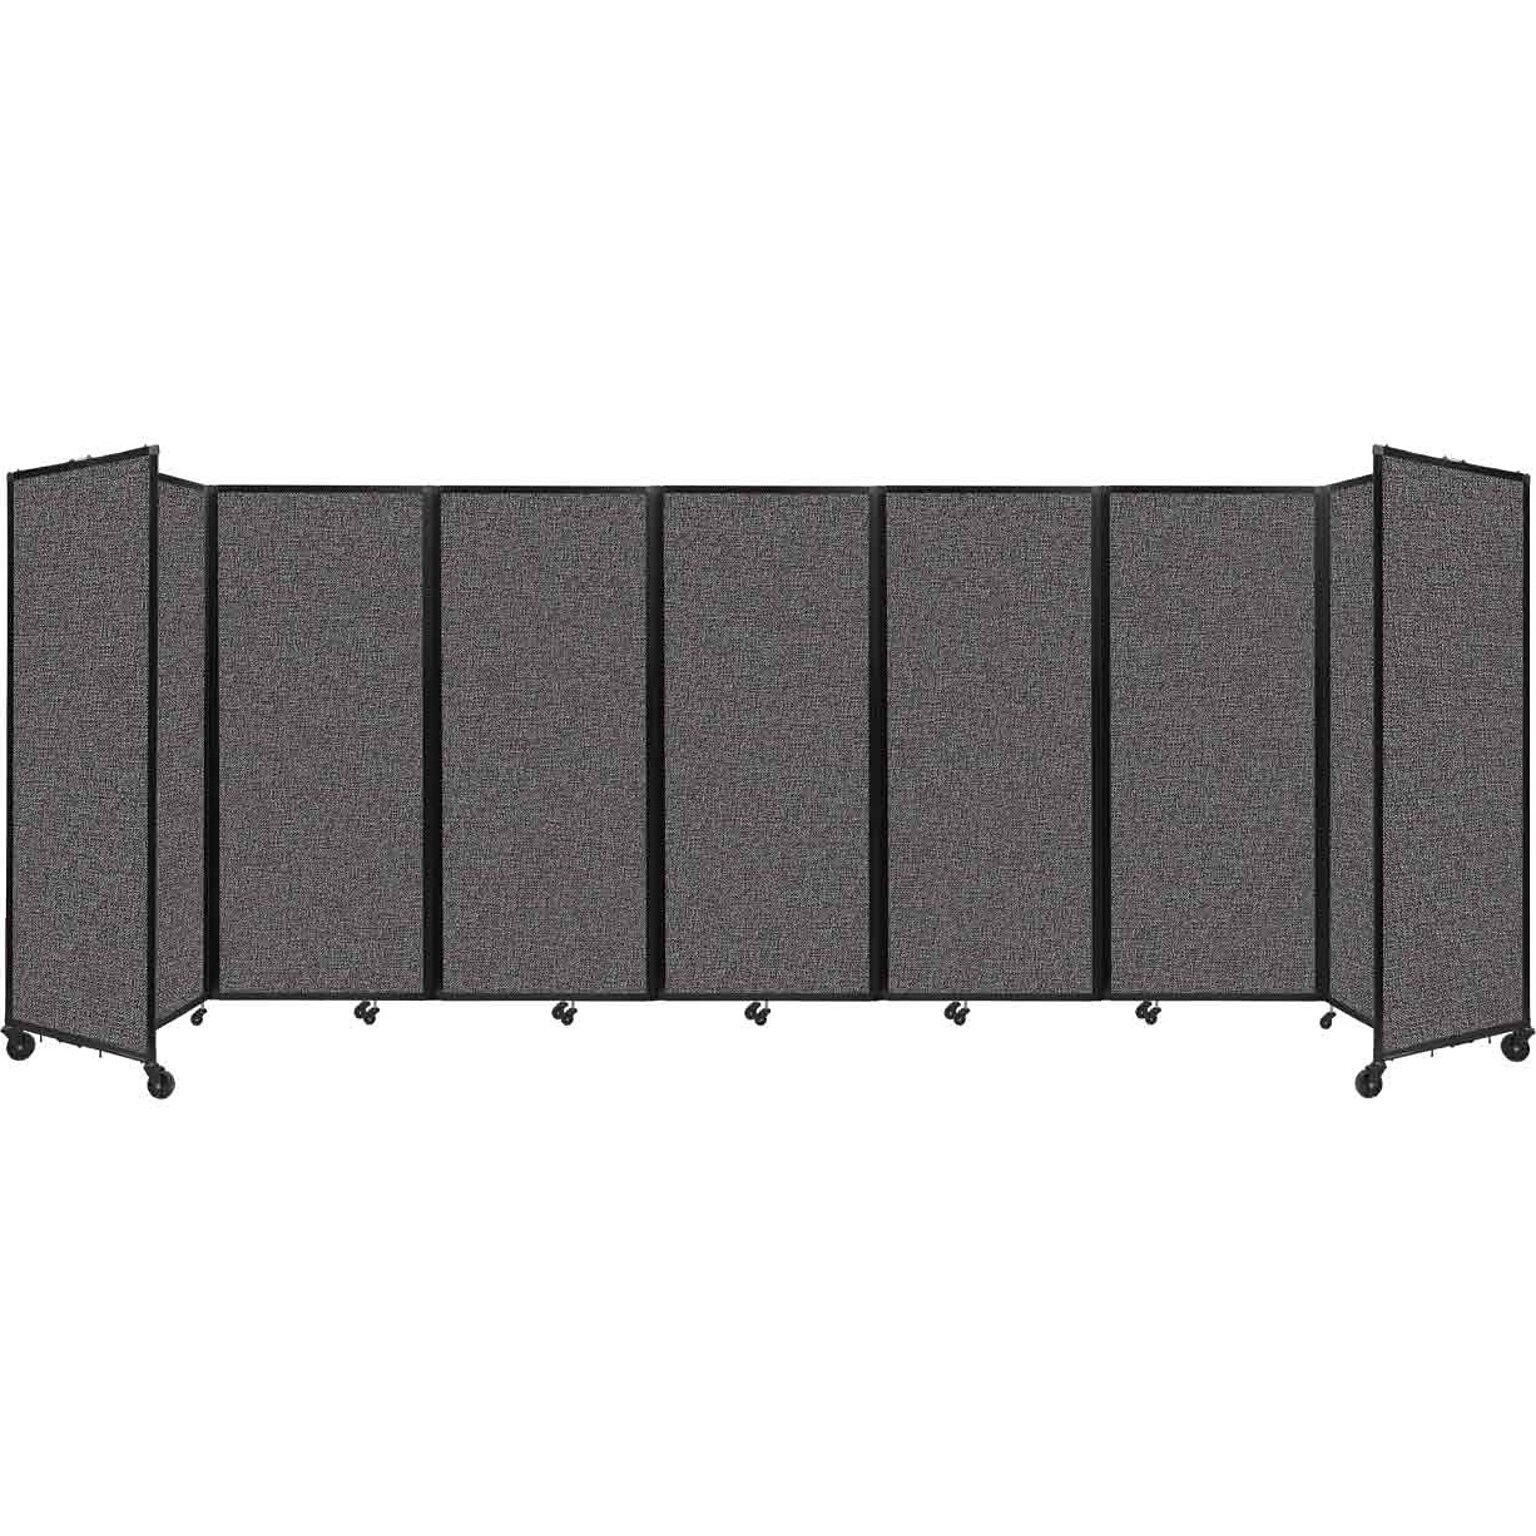 Versare The Room Divider 360 Freestanding Folding Portable Partition, 82H x 234W, Charcoal Gray Fabric (1182707)